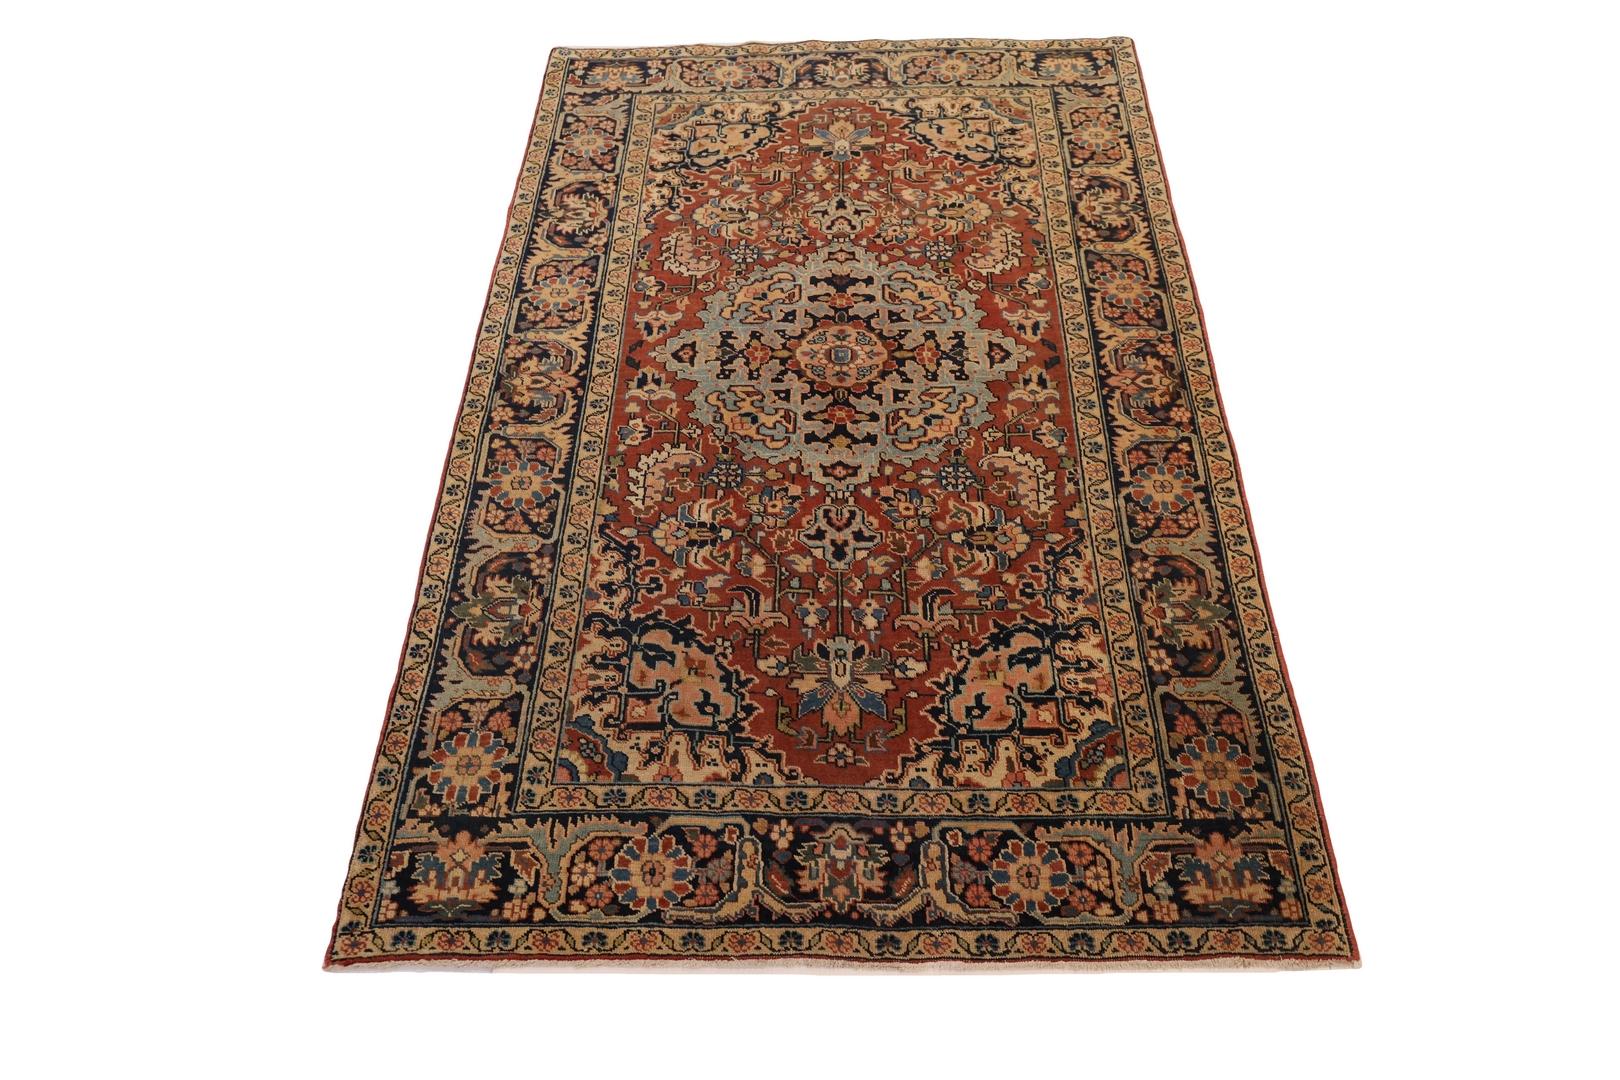 The Heriz rug is a stunning example of traditional Persian weaving, characterized by its bold and striking design. At the heart of the rug lies a beautiful light-blue medallion, adorned with intricate designs in colors of pink, red, blue, light